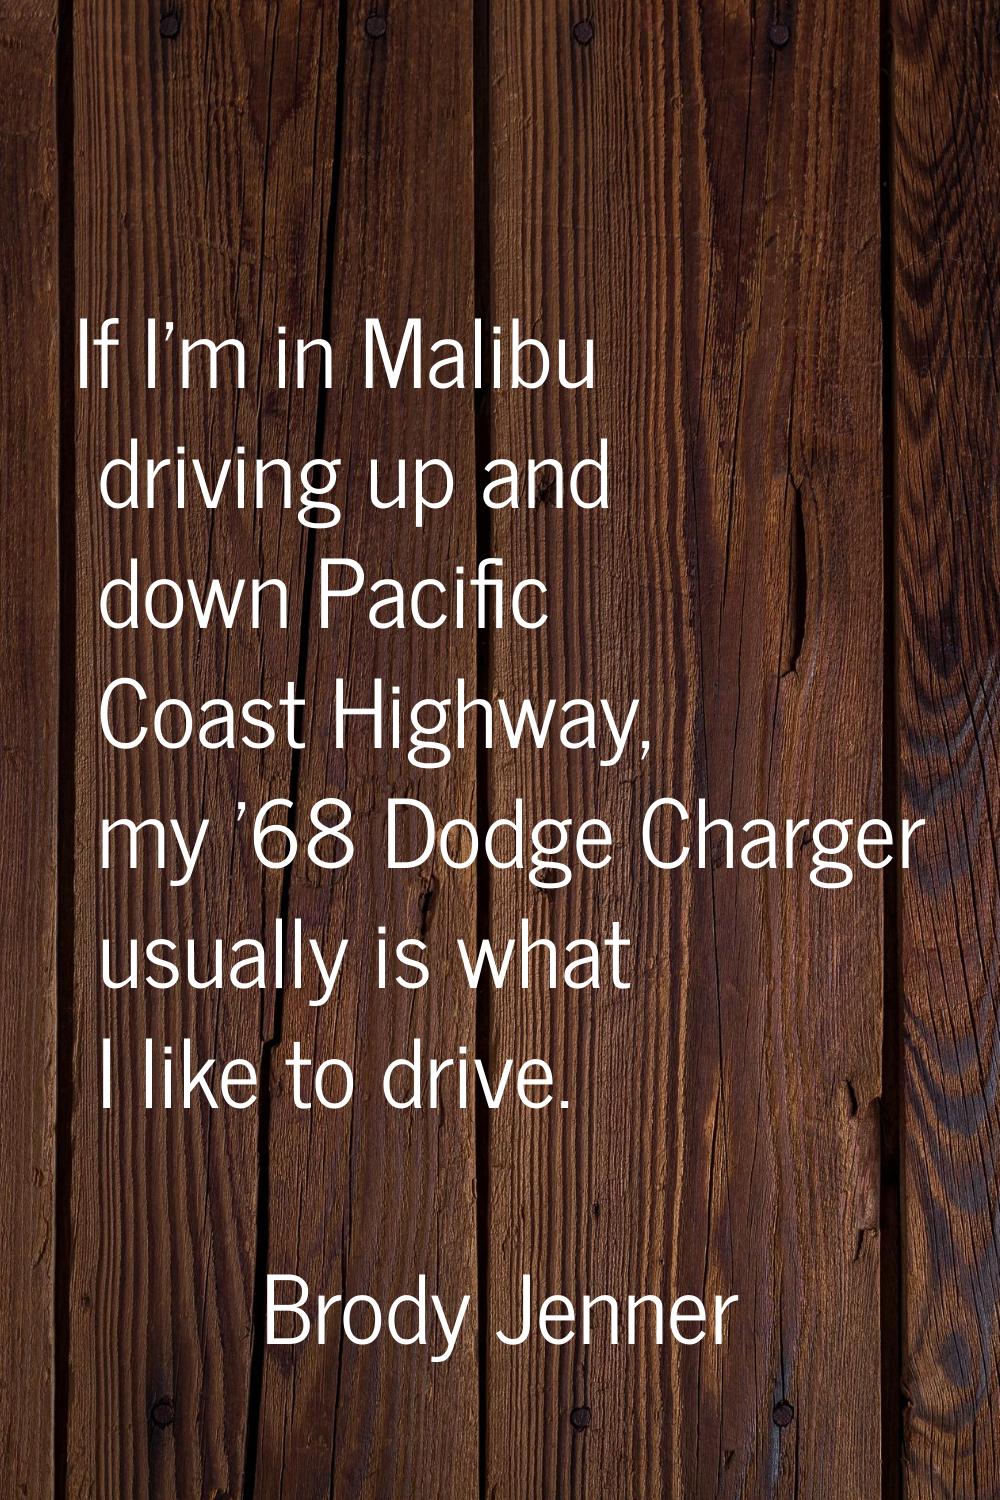 If I'm in Malibu driving up and down Pacific Coast Highway, my '68 Dodge Charger usually is what I 